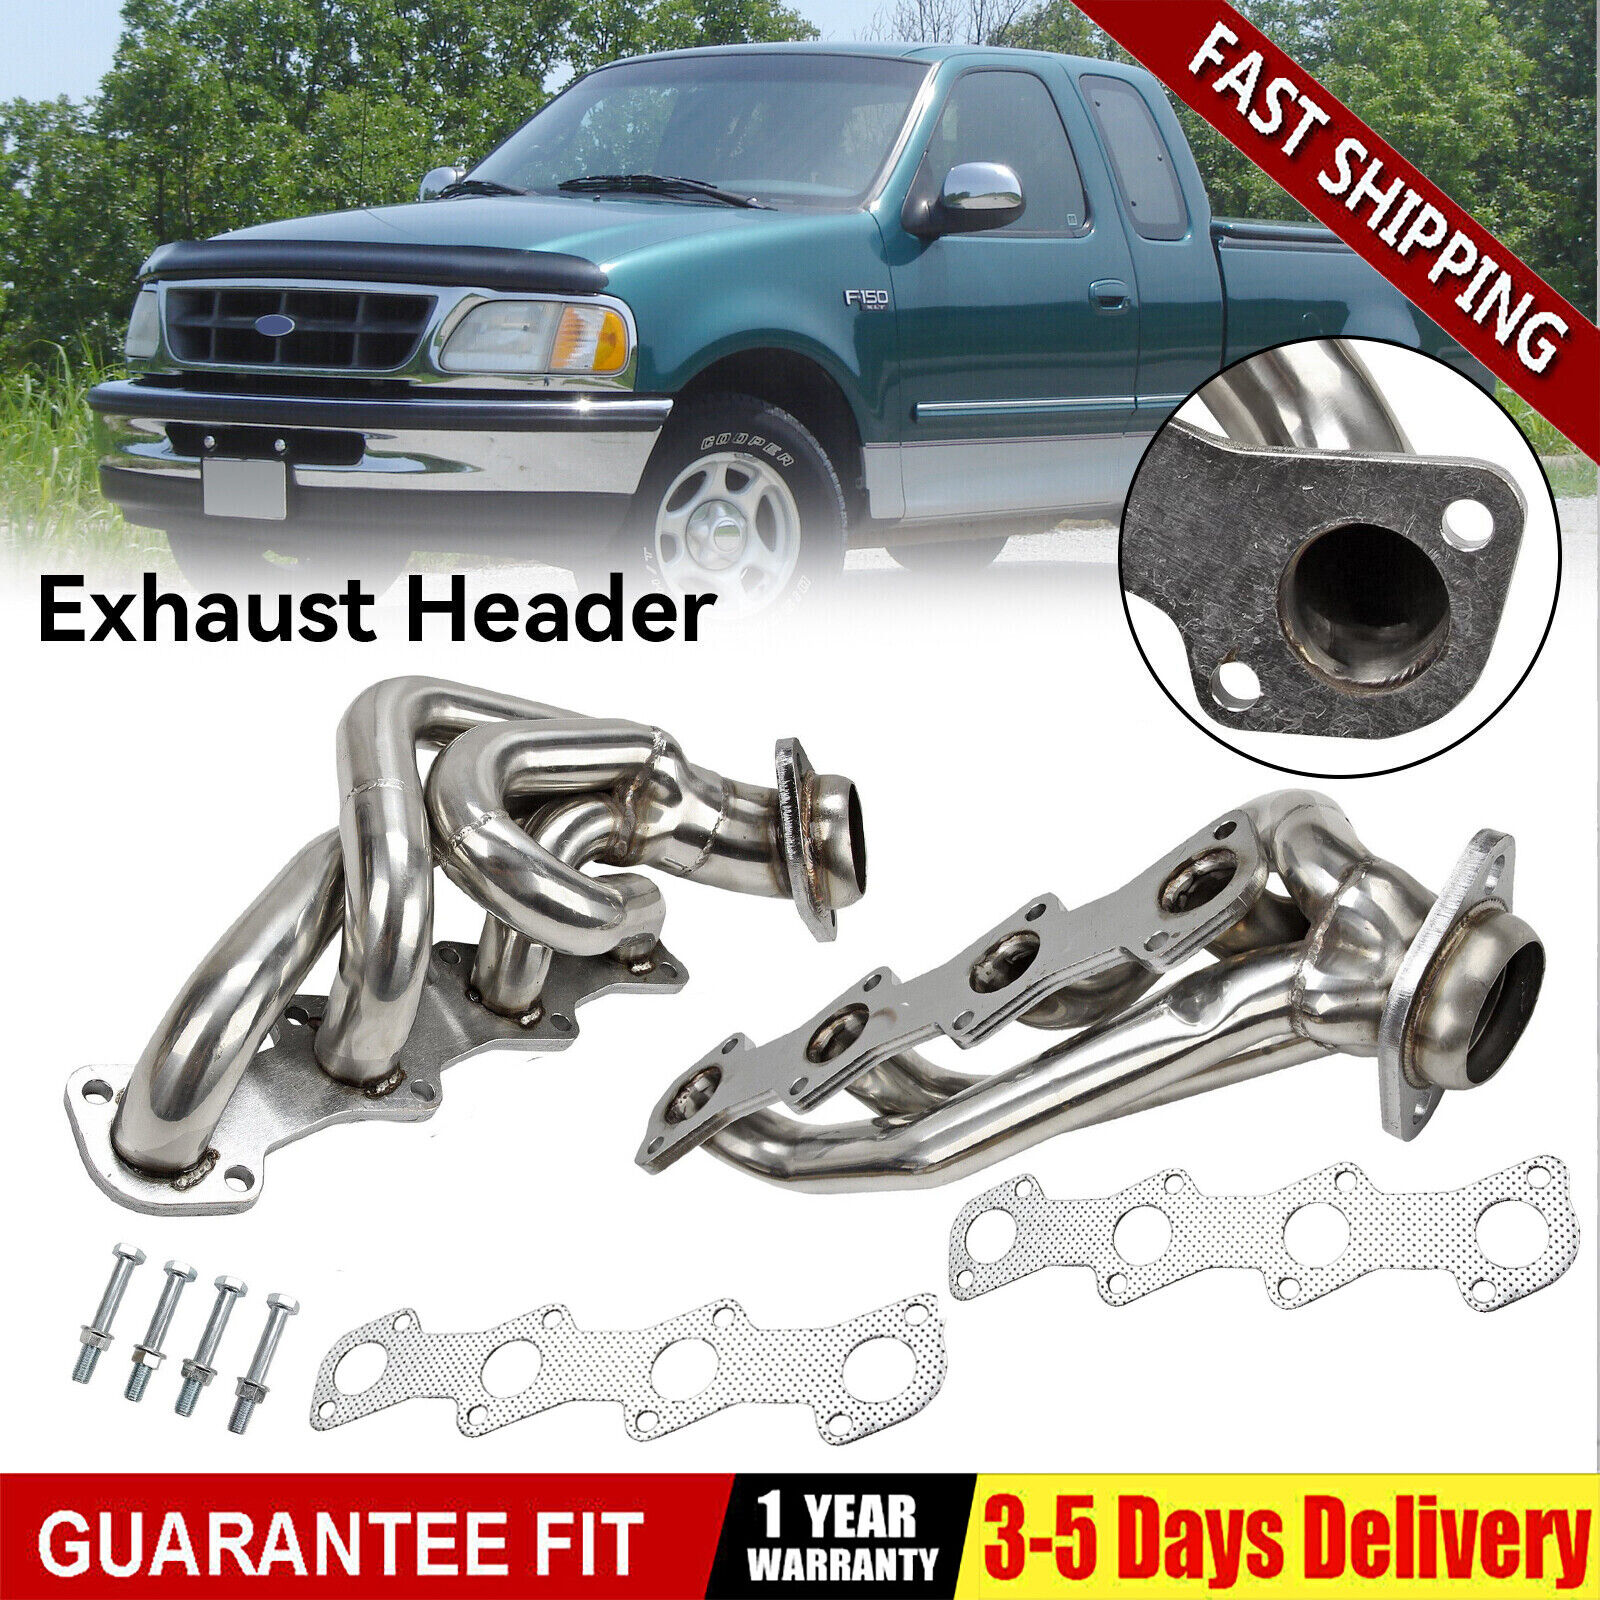 Manifold Headers Fit Ford F150 F250 Expedition 1997-2003 5.4L V8 Shorty